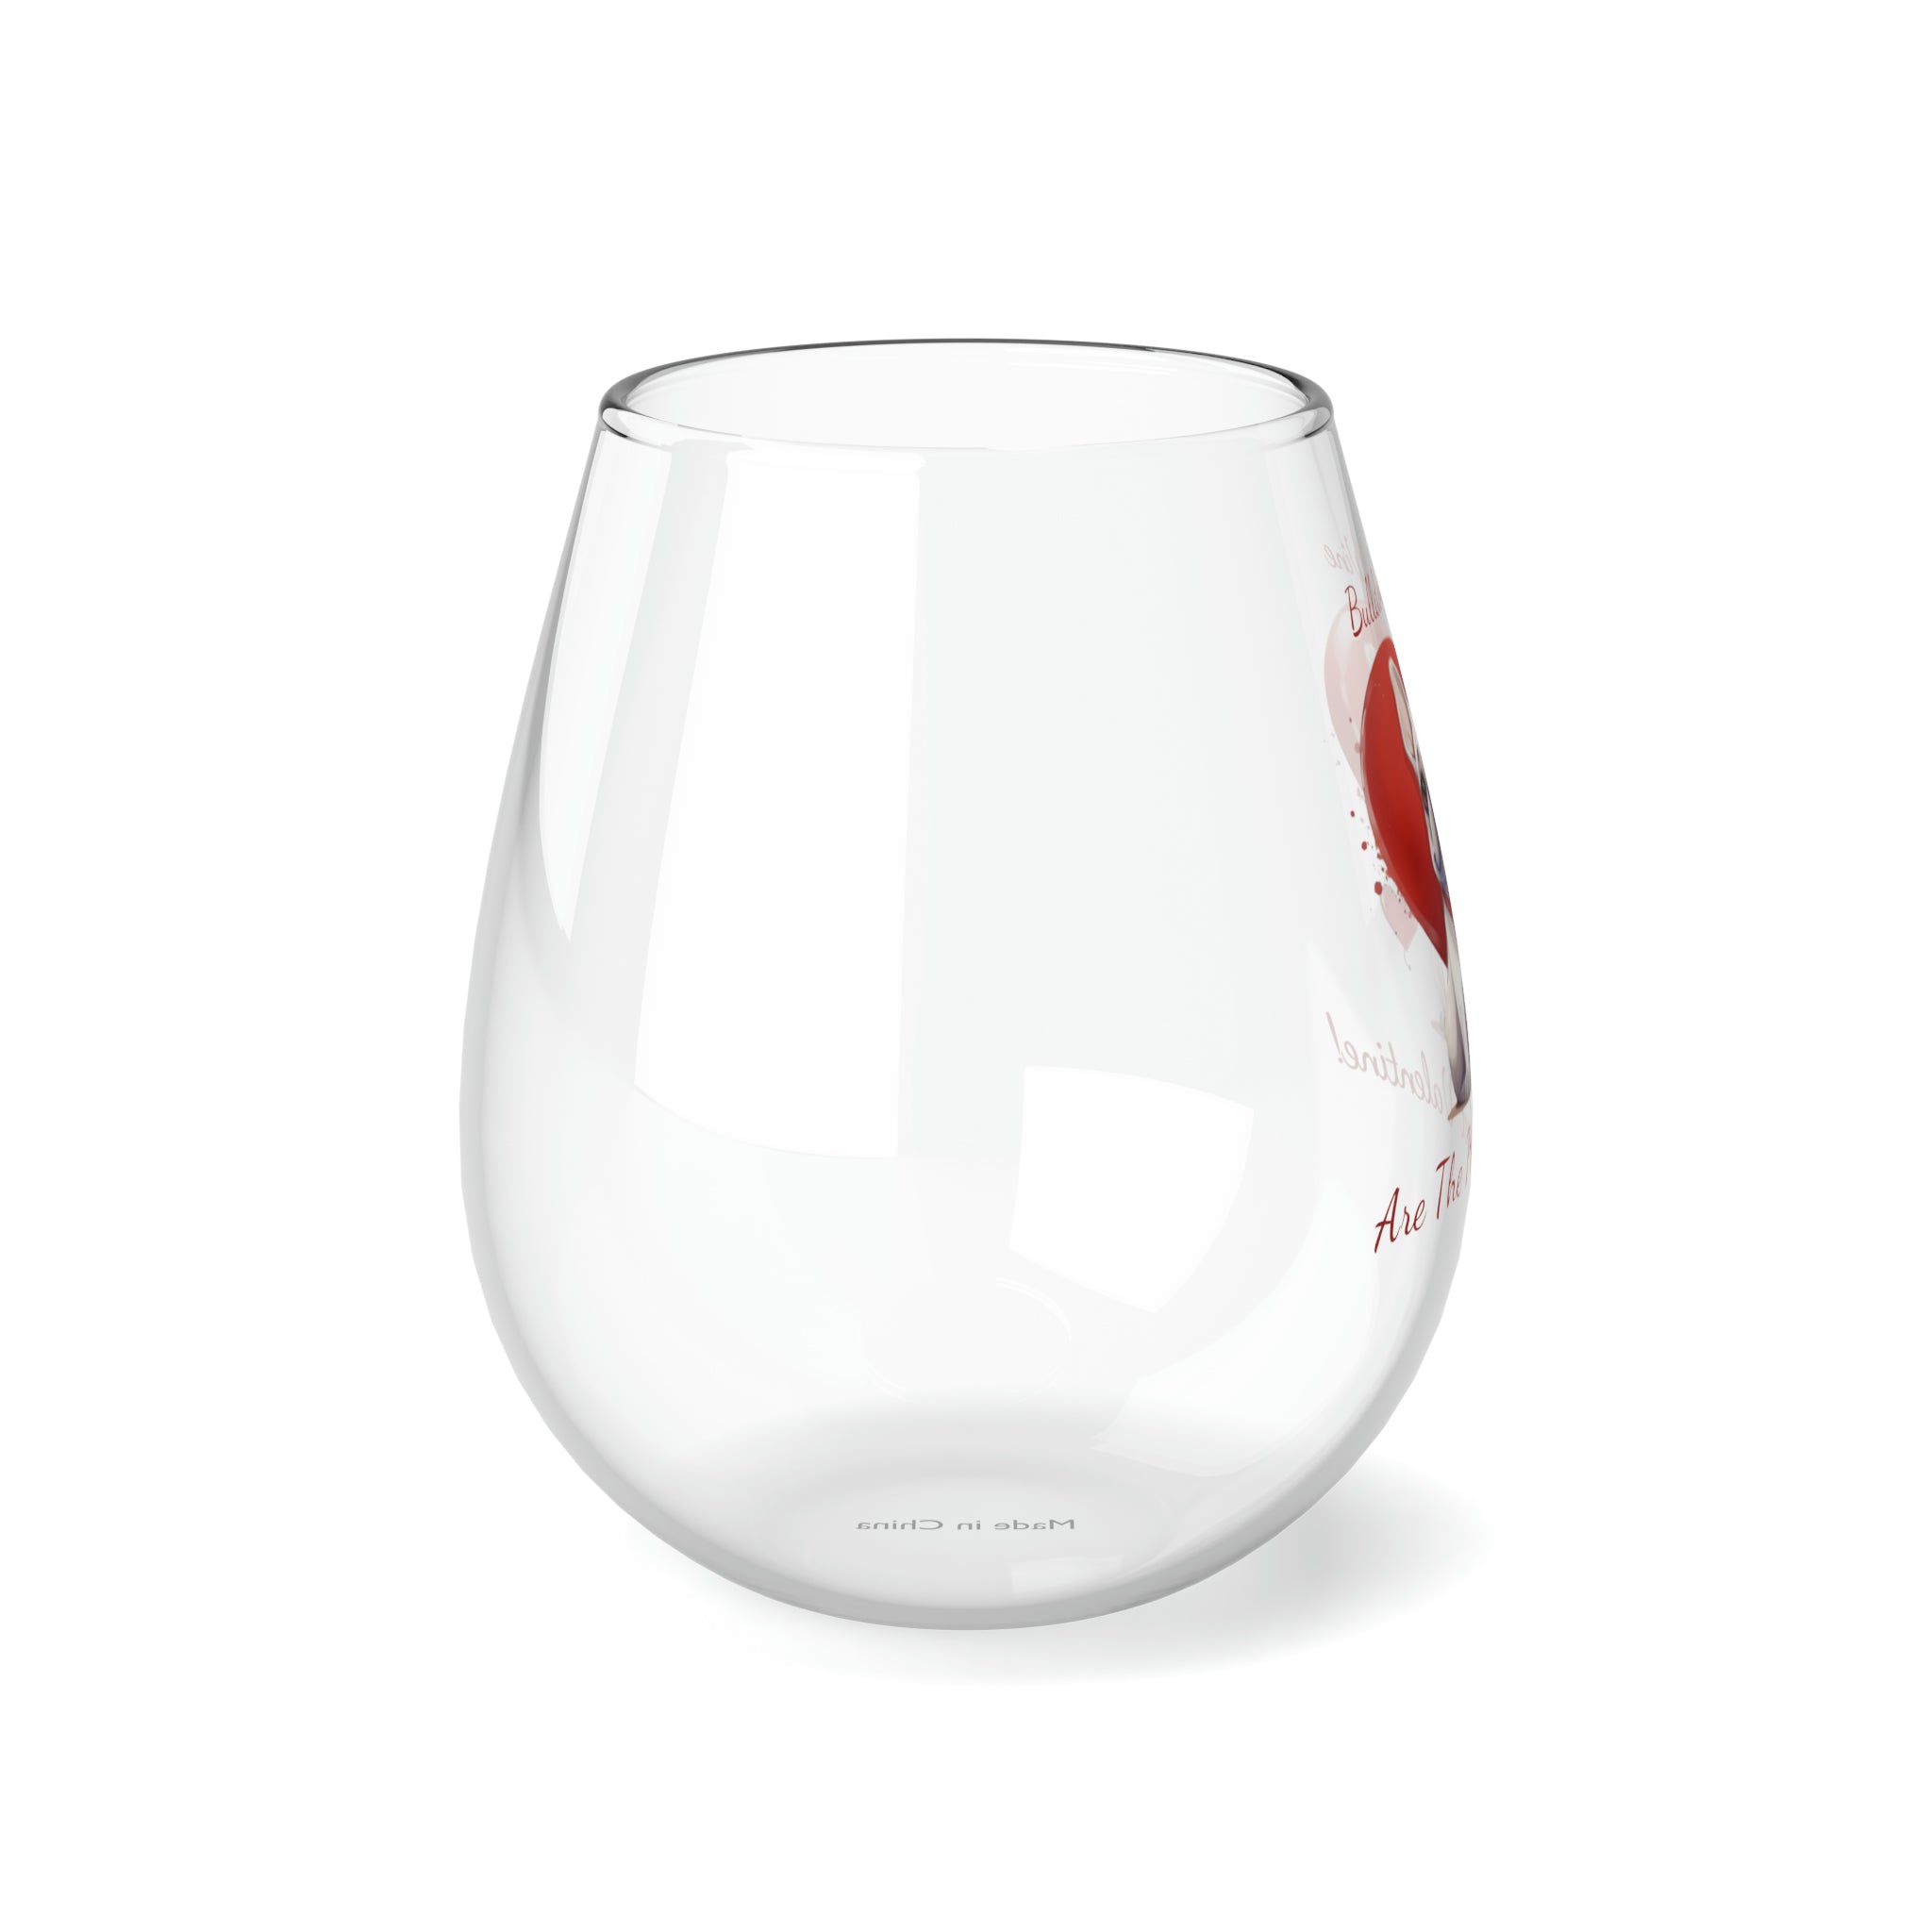 Bulldogs & Wine Are the Perfect Valentine! Stemless Wine Glass - White French